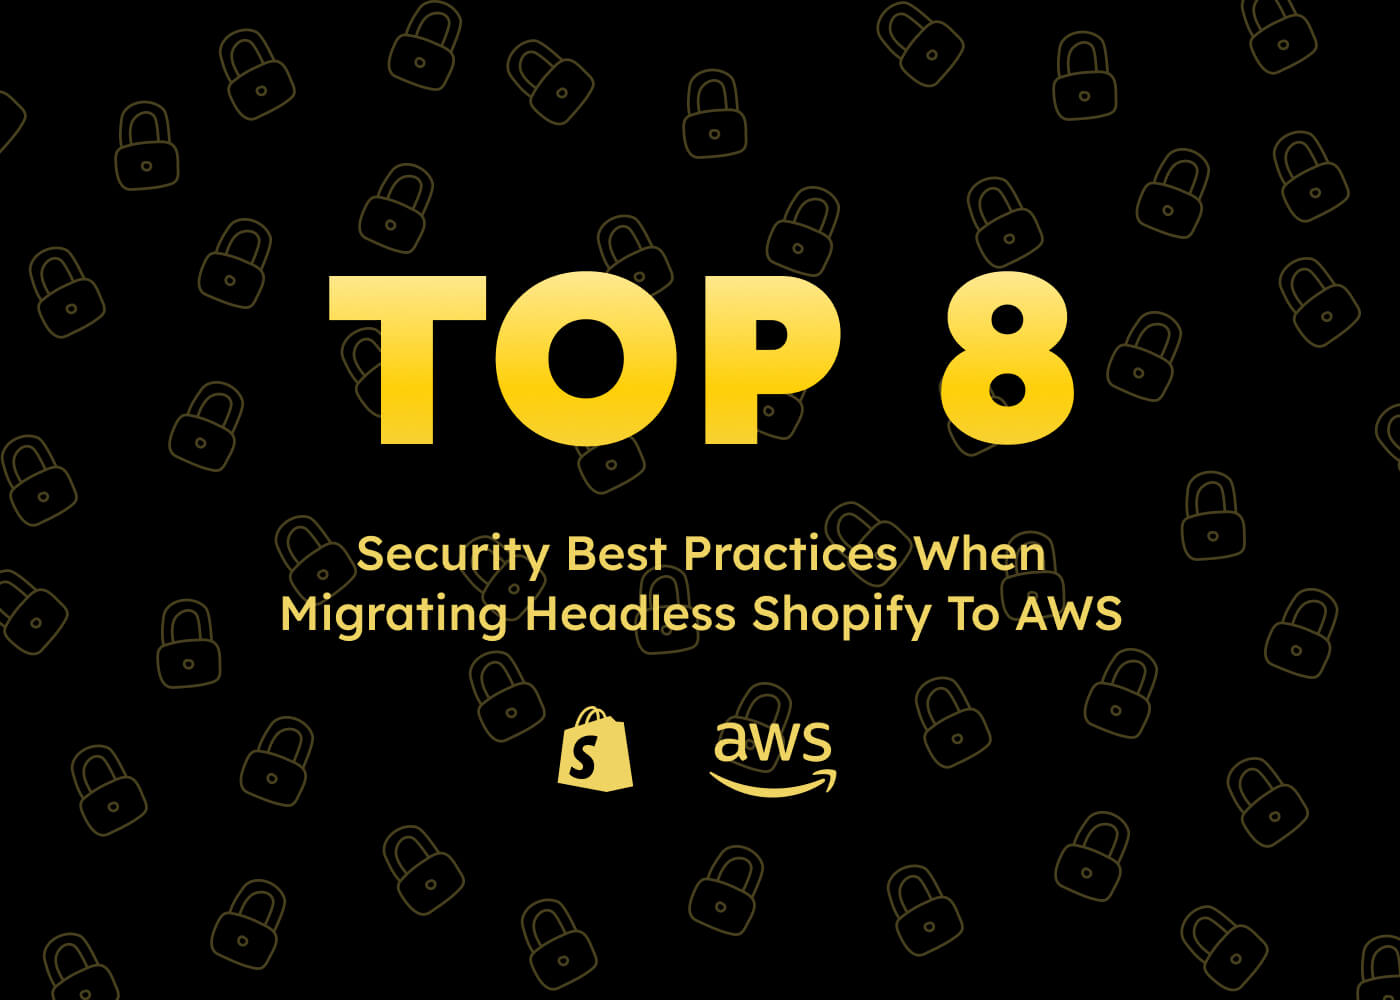 Top 8 Security Best Practices When Migrating Headless Shopify to AWS